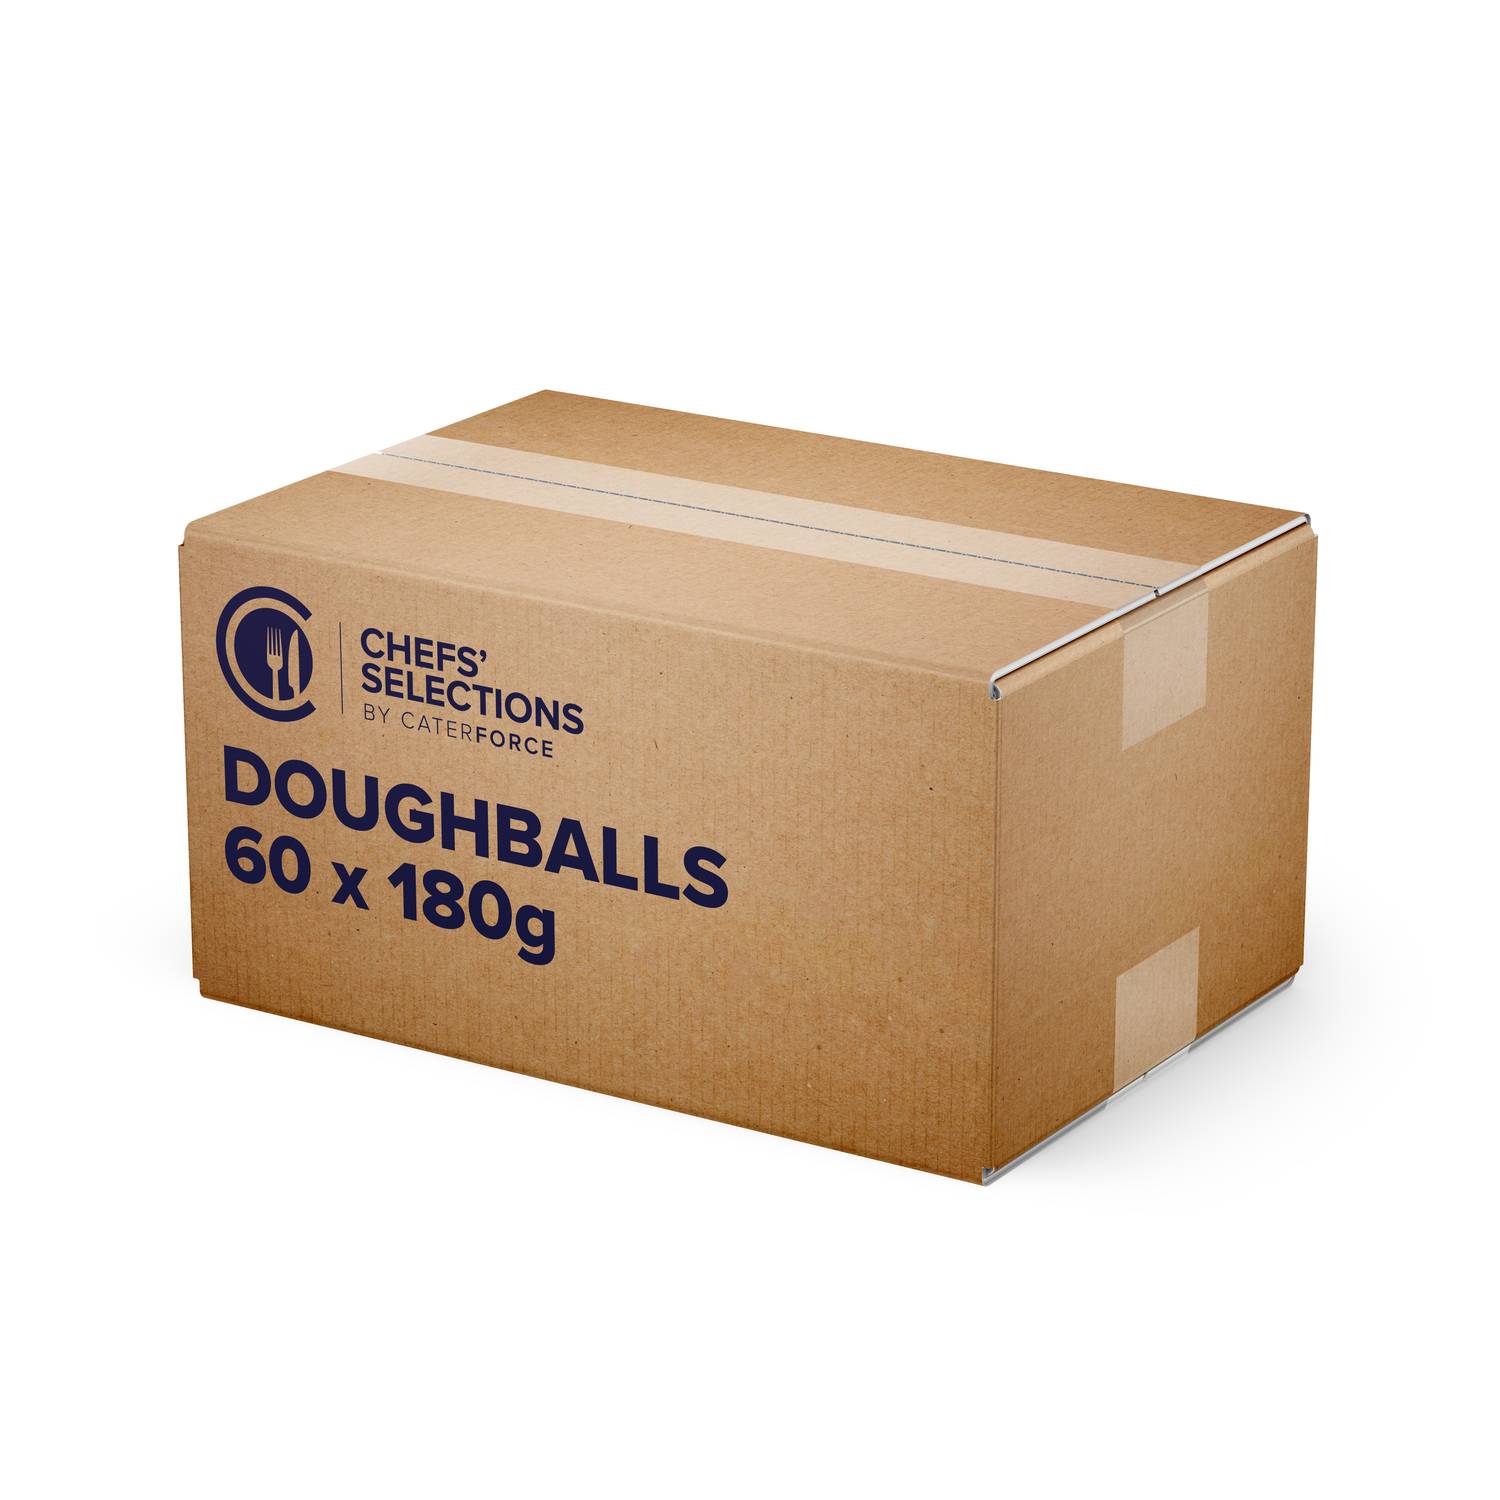 Chefs’ Selections Doughballs 180g (60 x 180g)